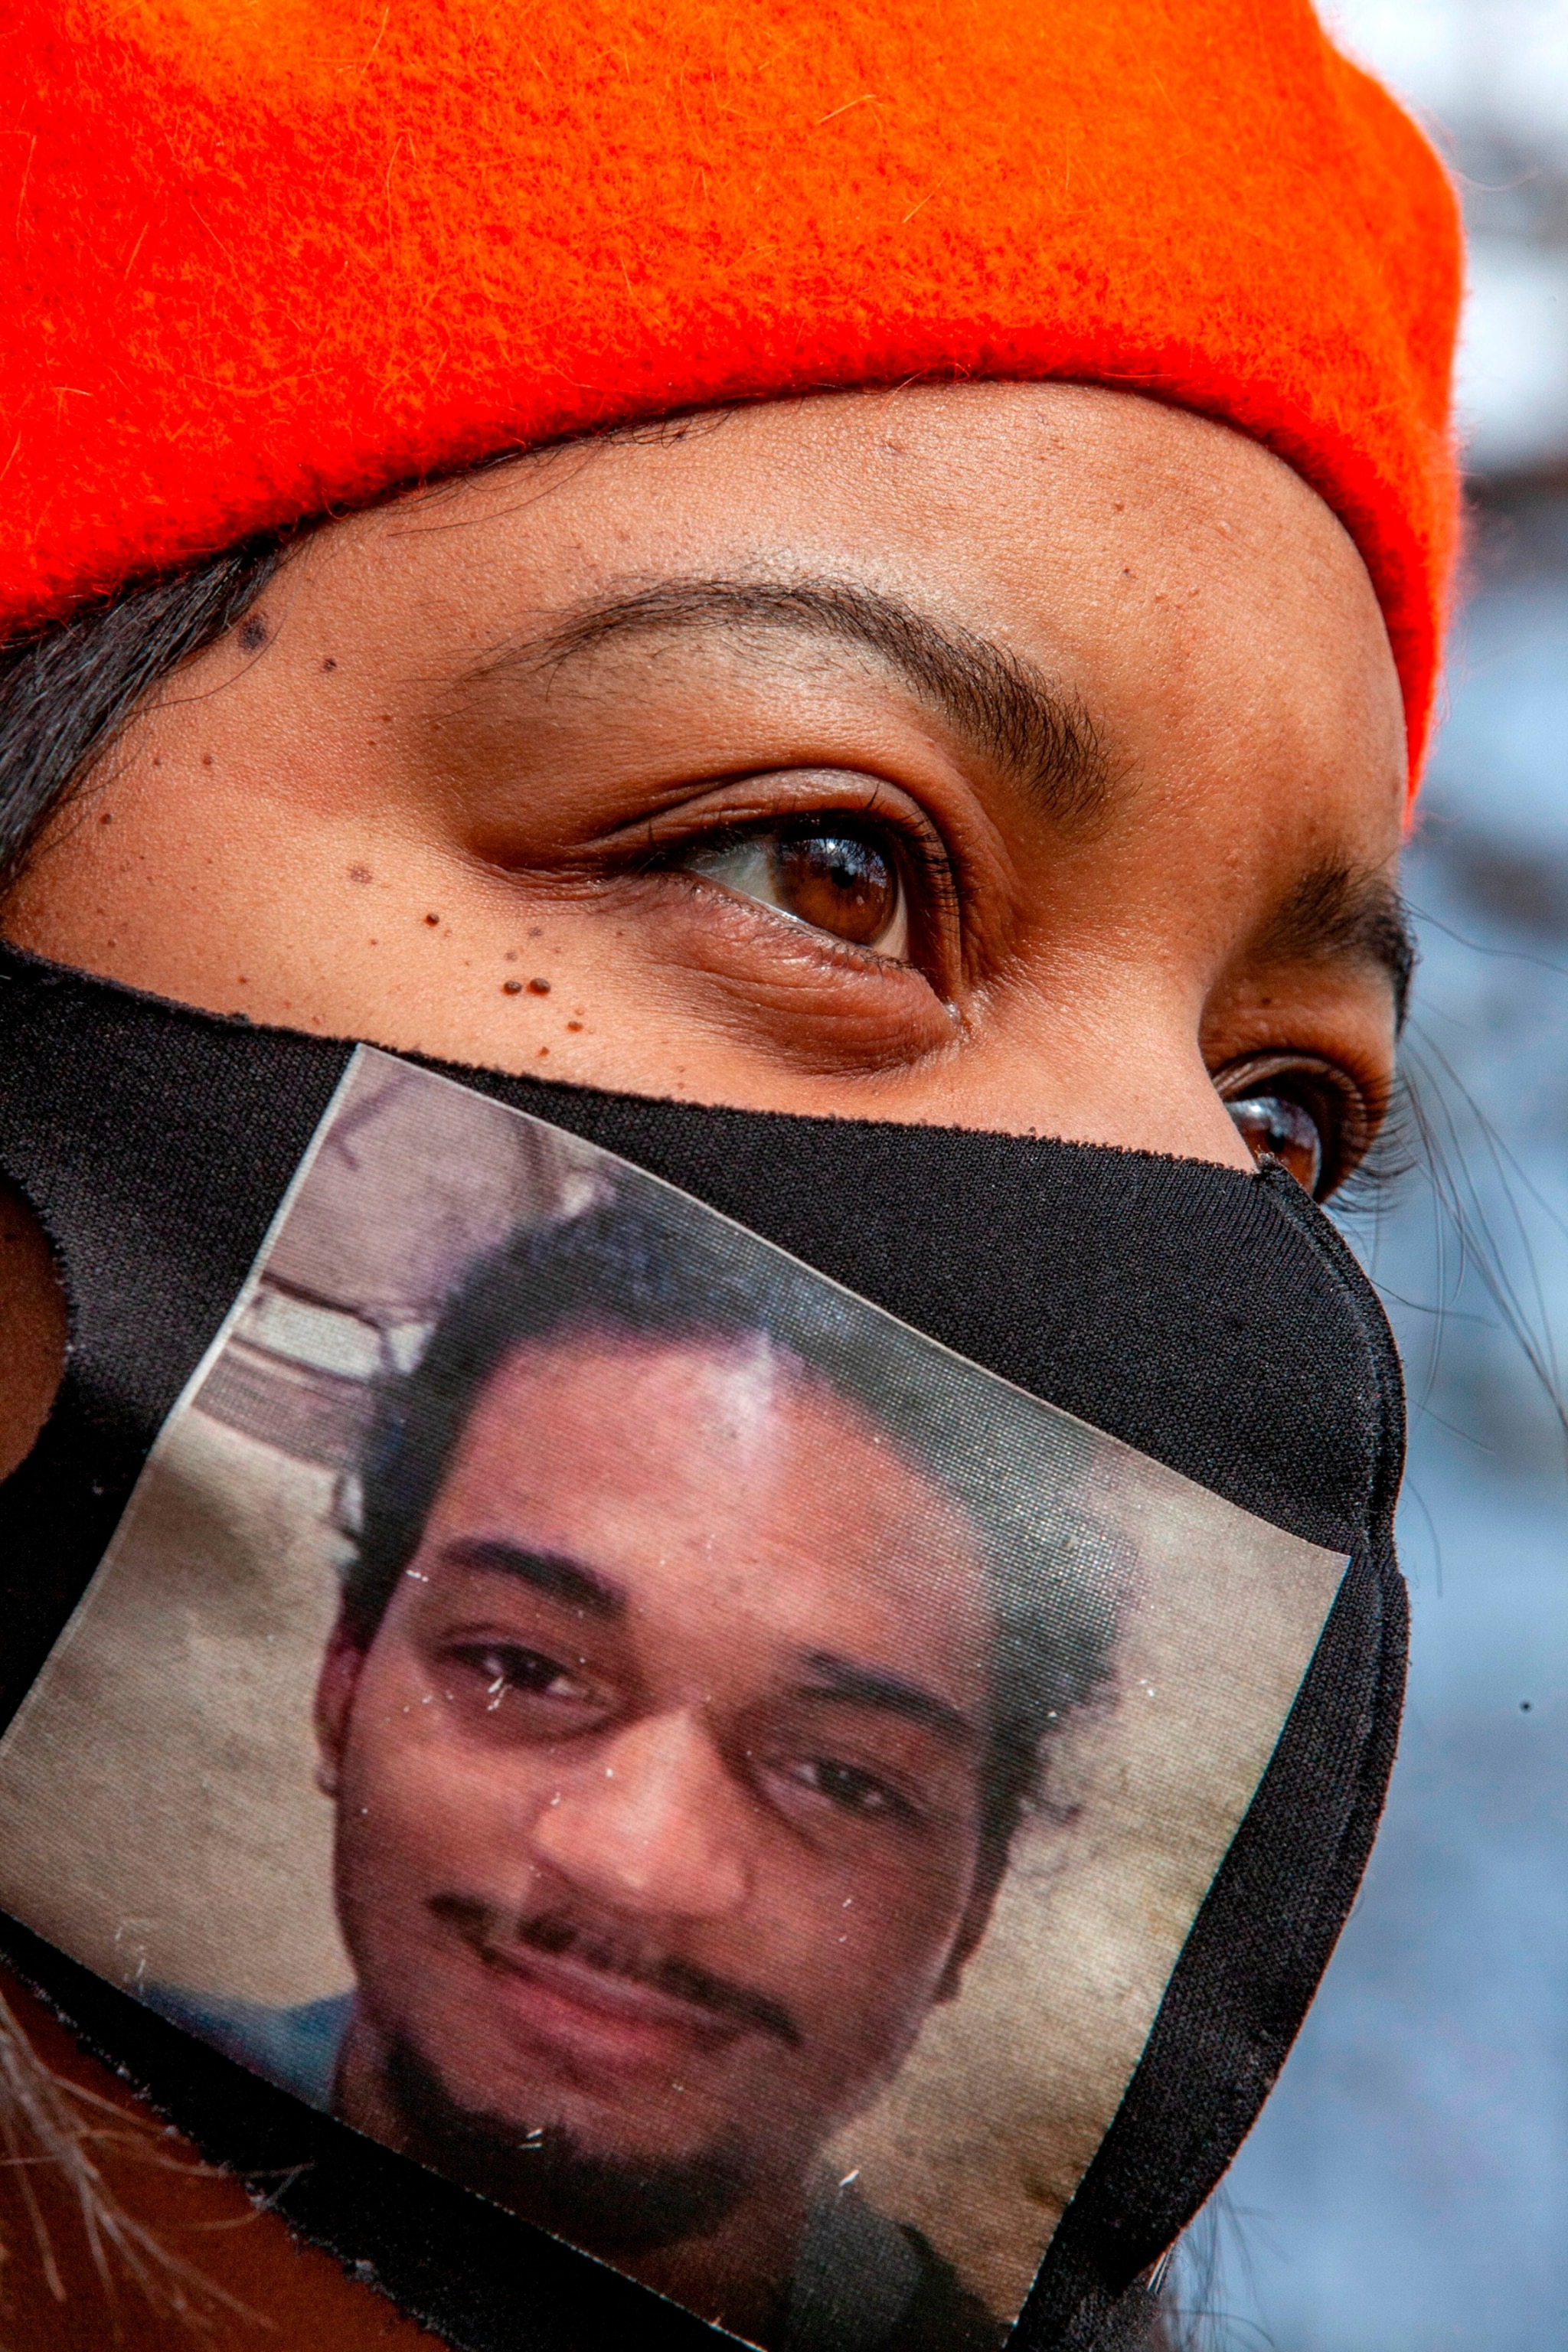 PHOTO: In this Jan. 30, 2021, file photo, activist Karla Harris, a member of the Mothers of Murdered Columbus Children, is seen wearing a facemask with a picture of Casey Goodson Jr., during a protest. 